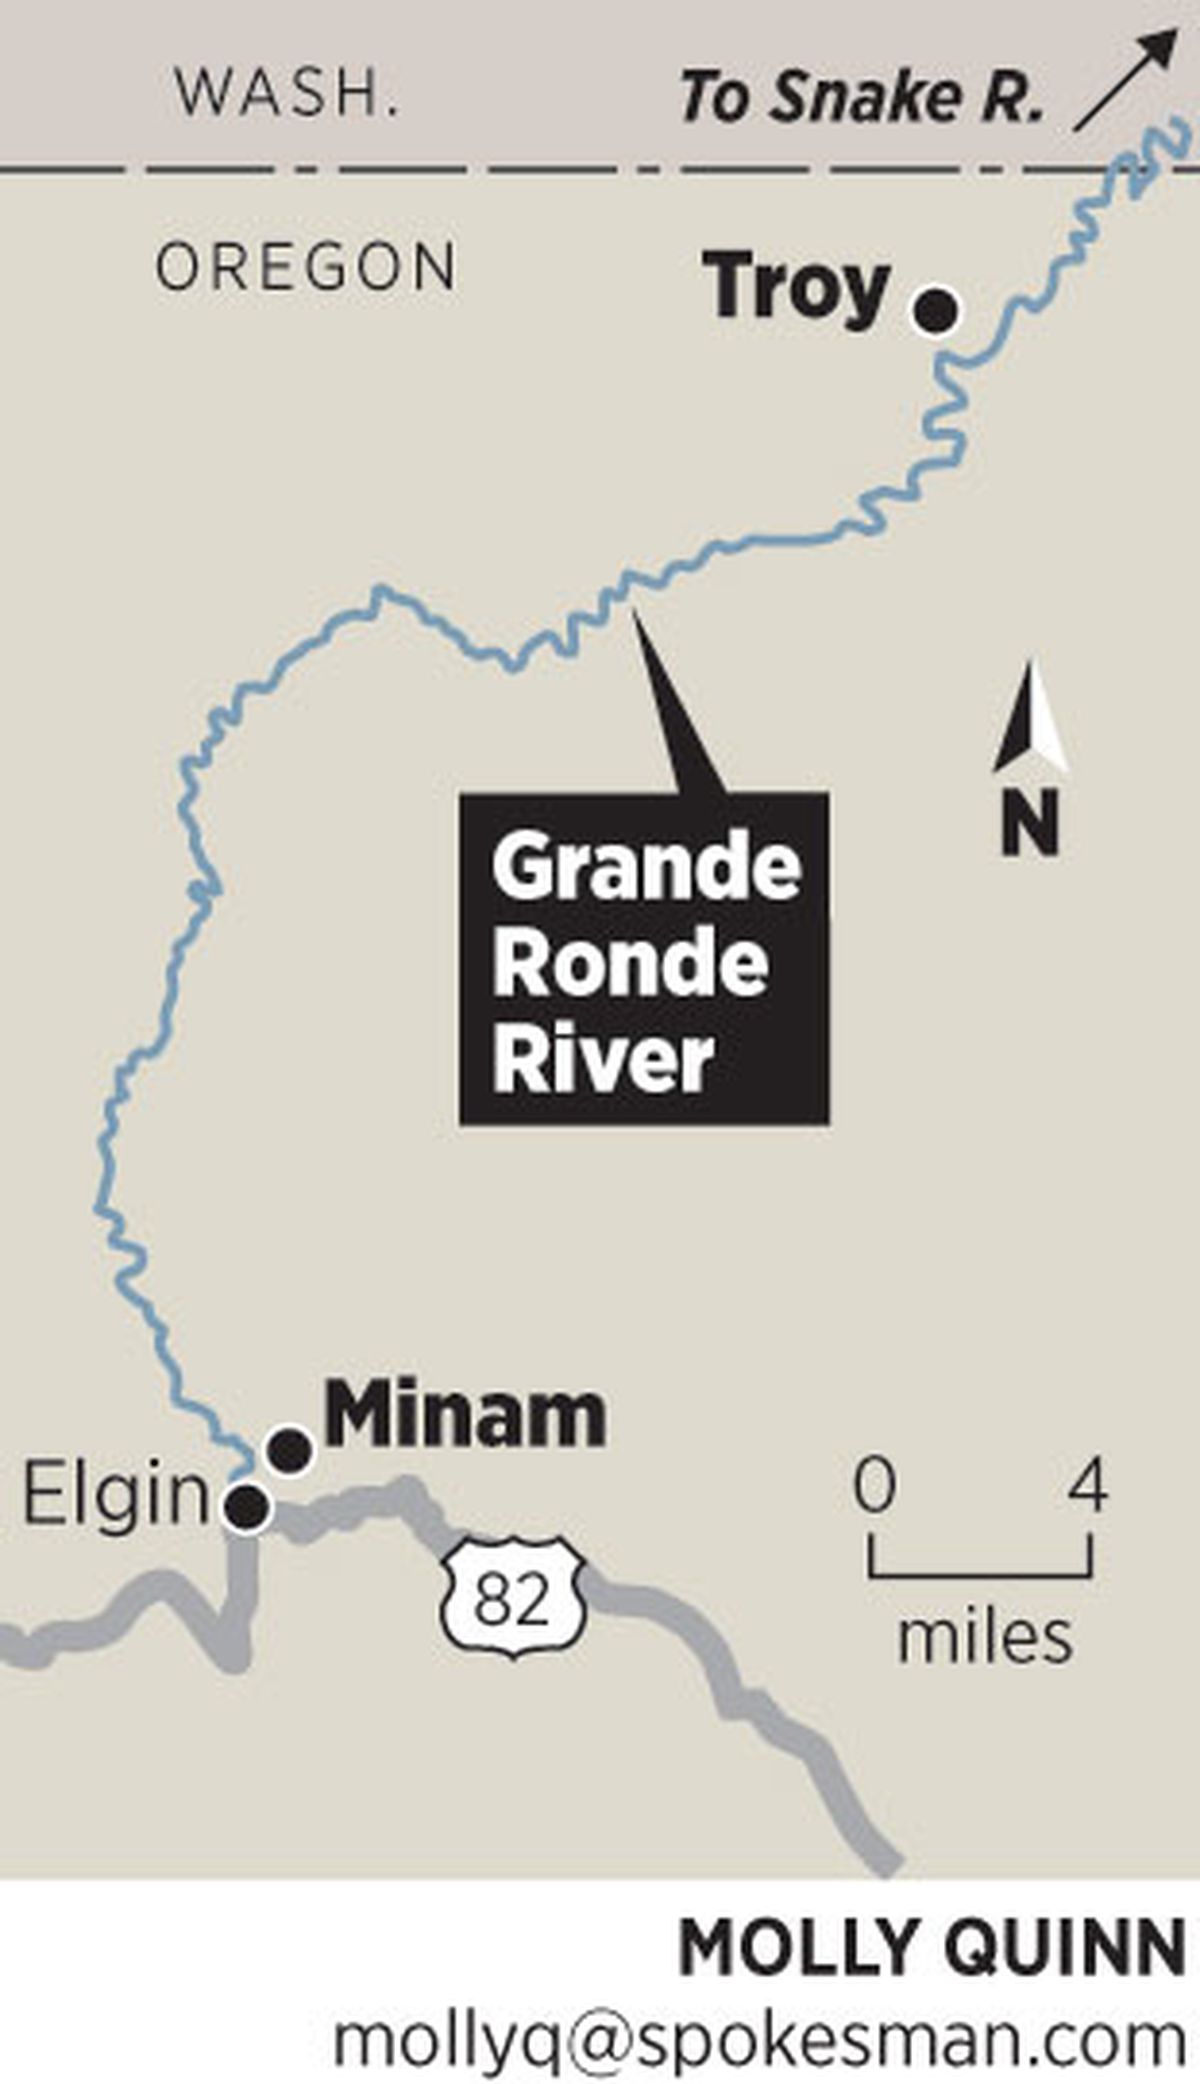 The Grande Ronde River in Oregon from the Minam area north to Troy near the Washington border is a popular rafting trip, especially in the spring and early summer season.